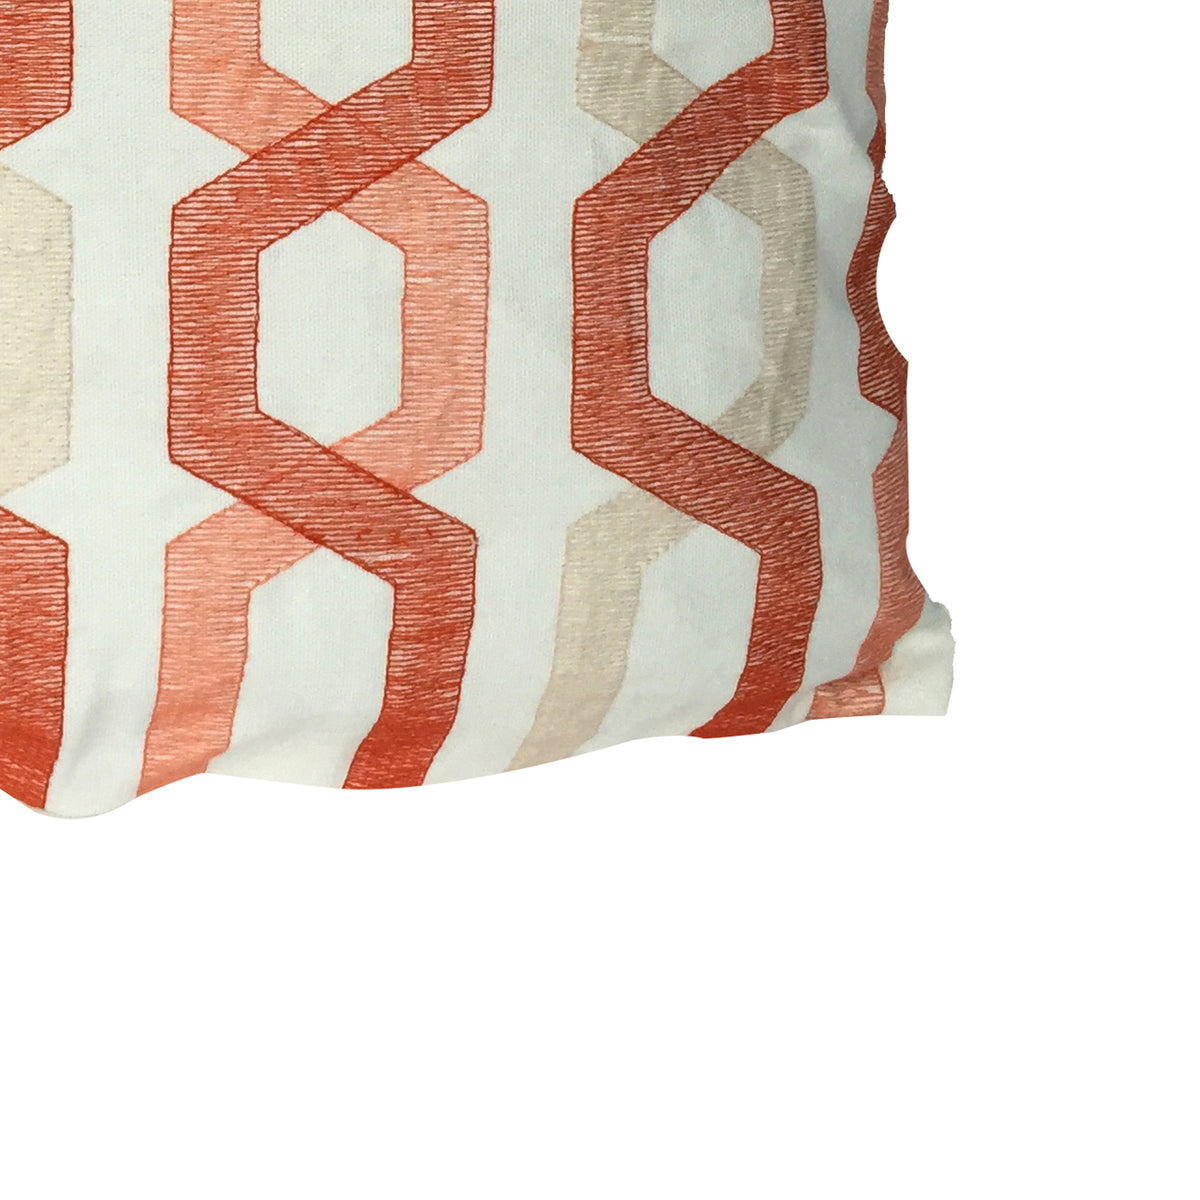 Contemporary Cotton Pillow with Geometric Embroidery, Red and Cream - BM200585